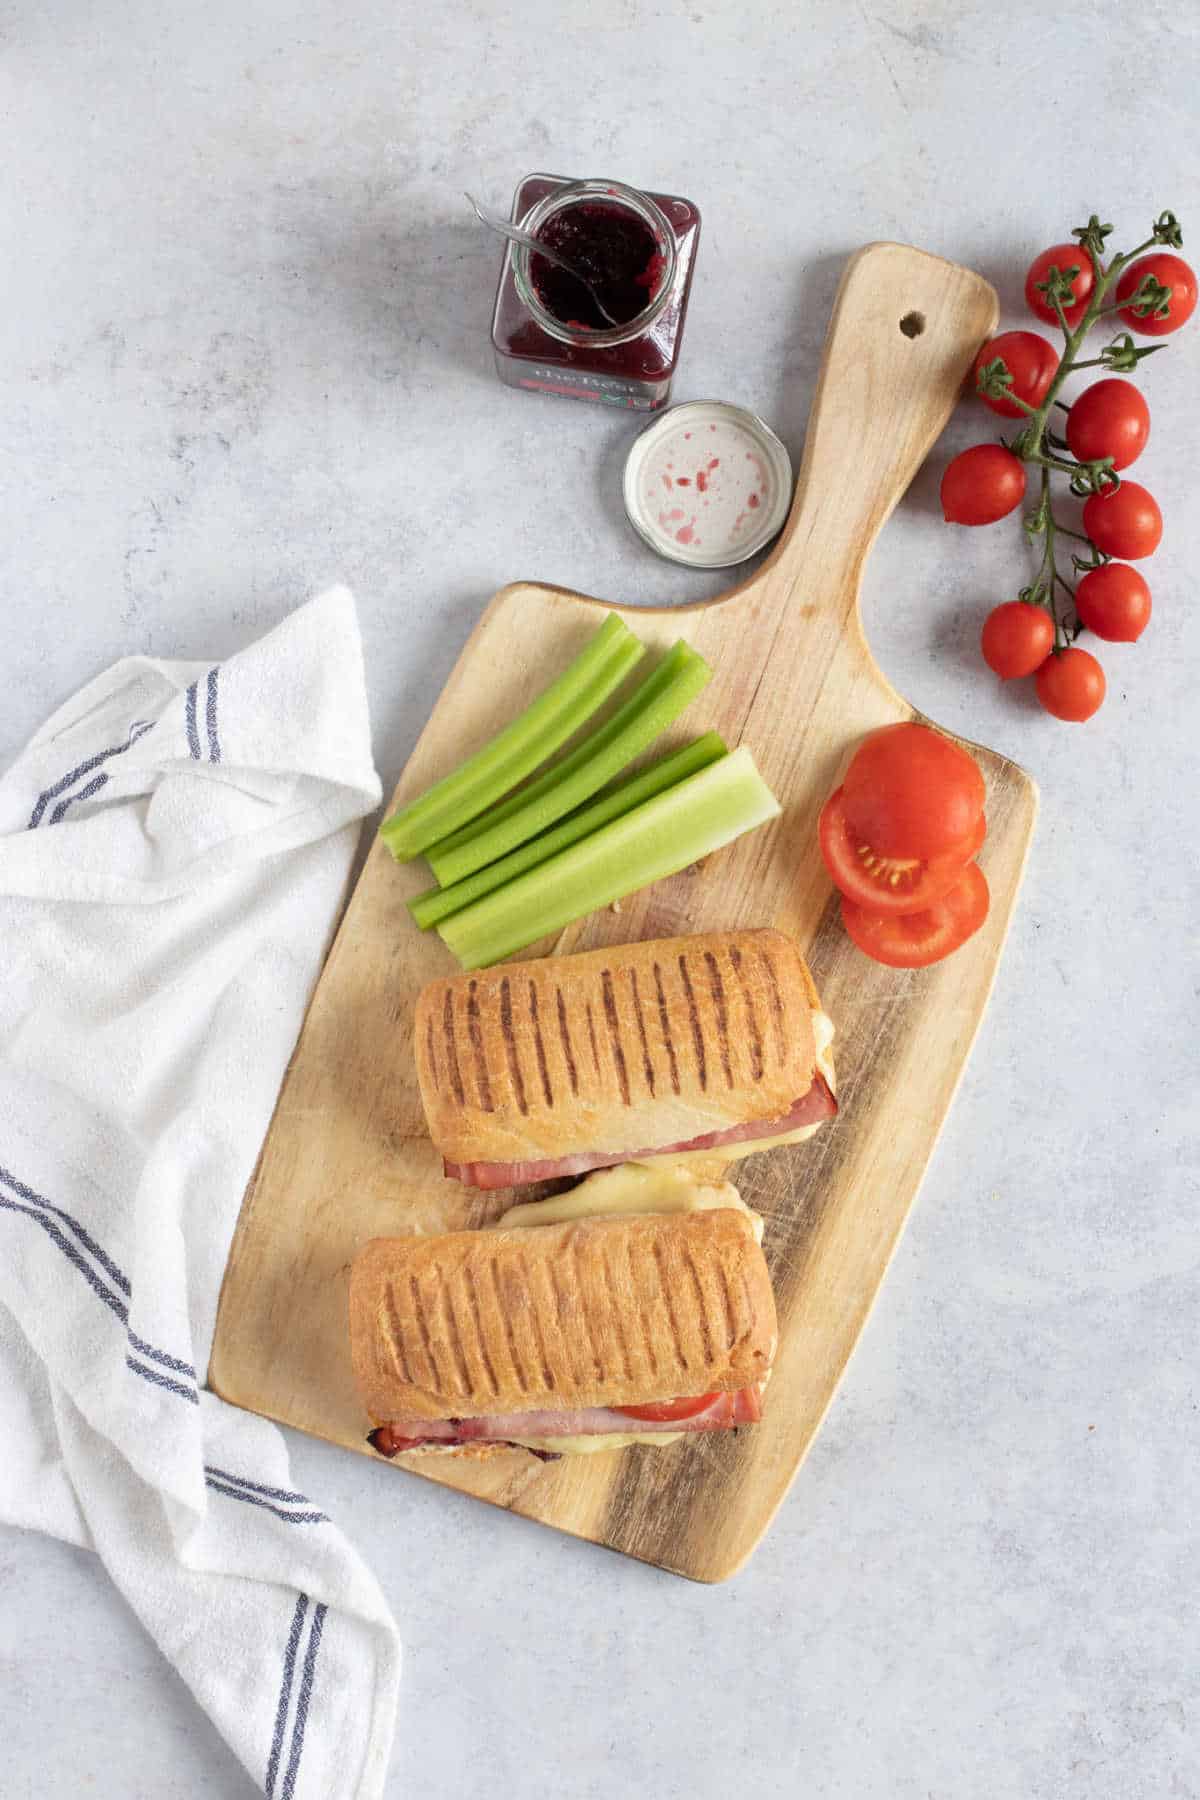 Two panini rolls on a wooden board with celery sticks.